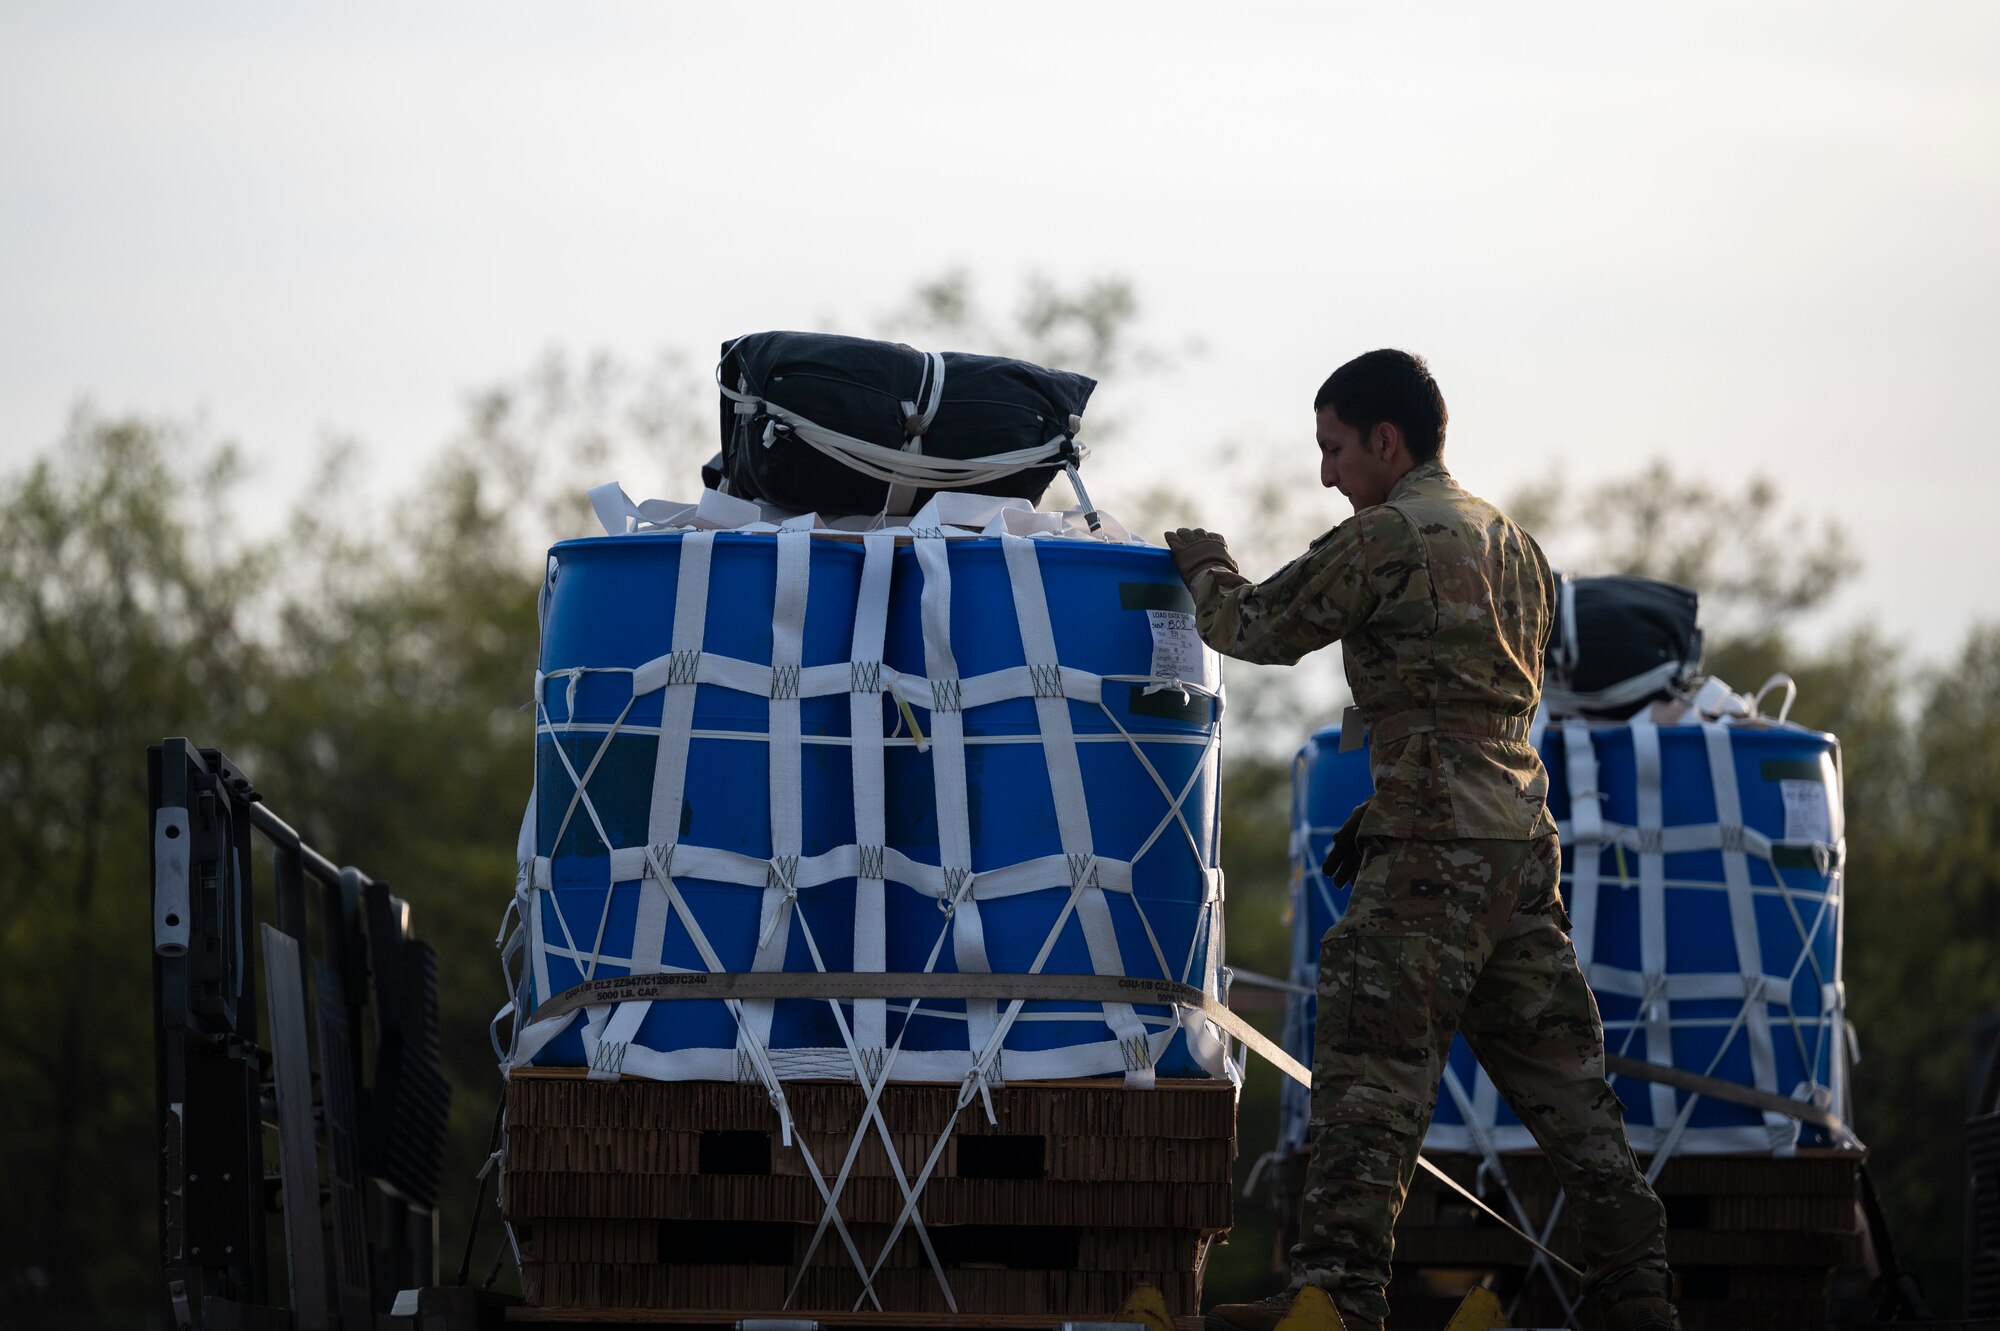 An Airman inspects a container delivery system